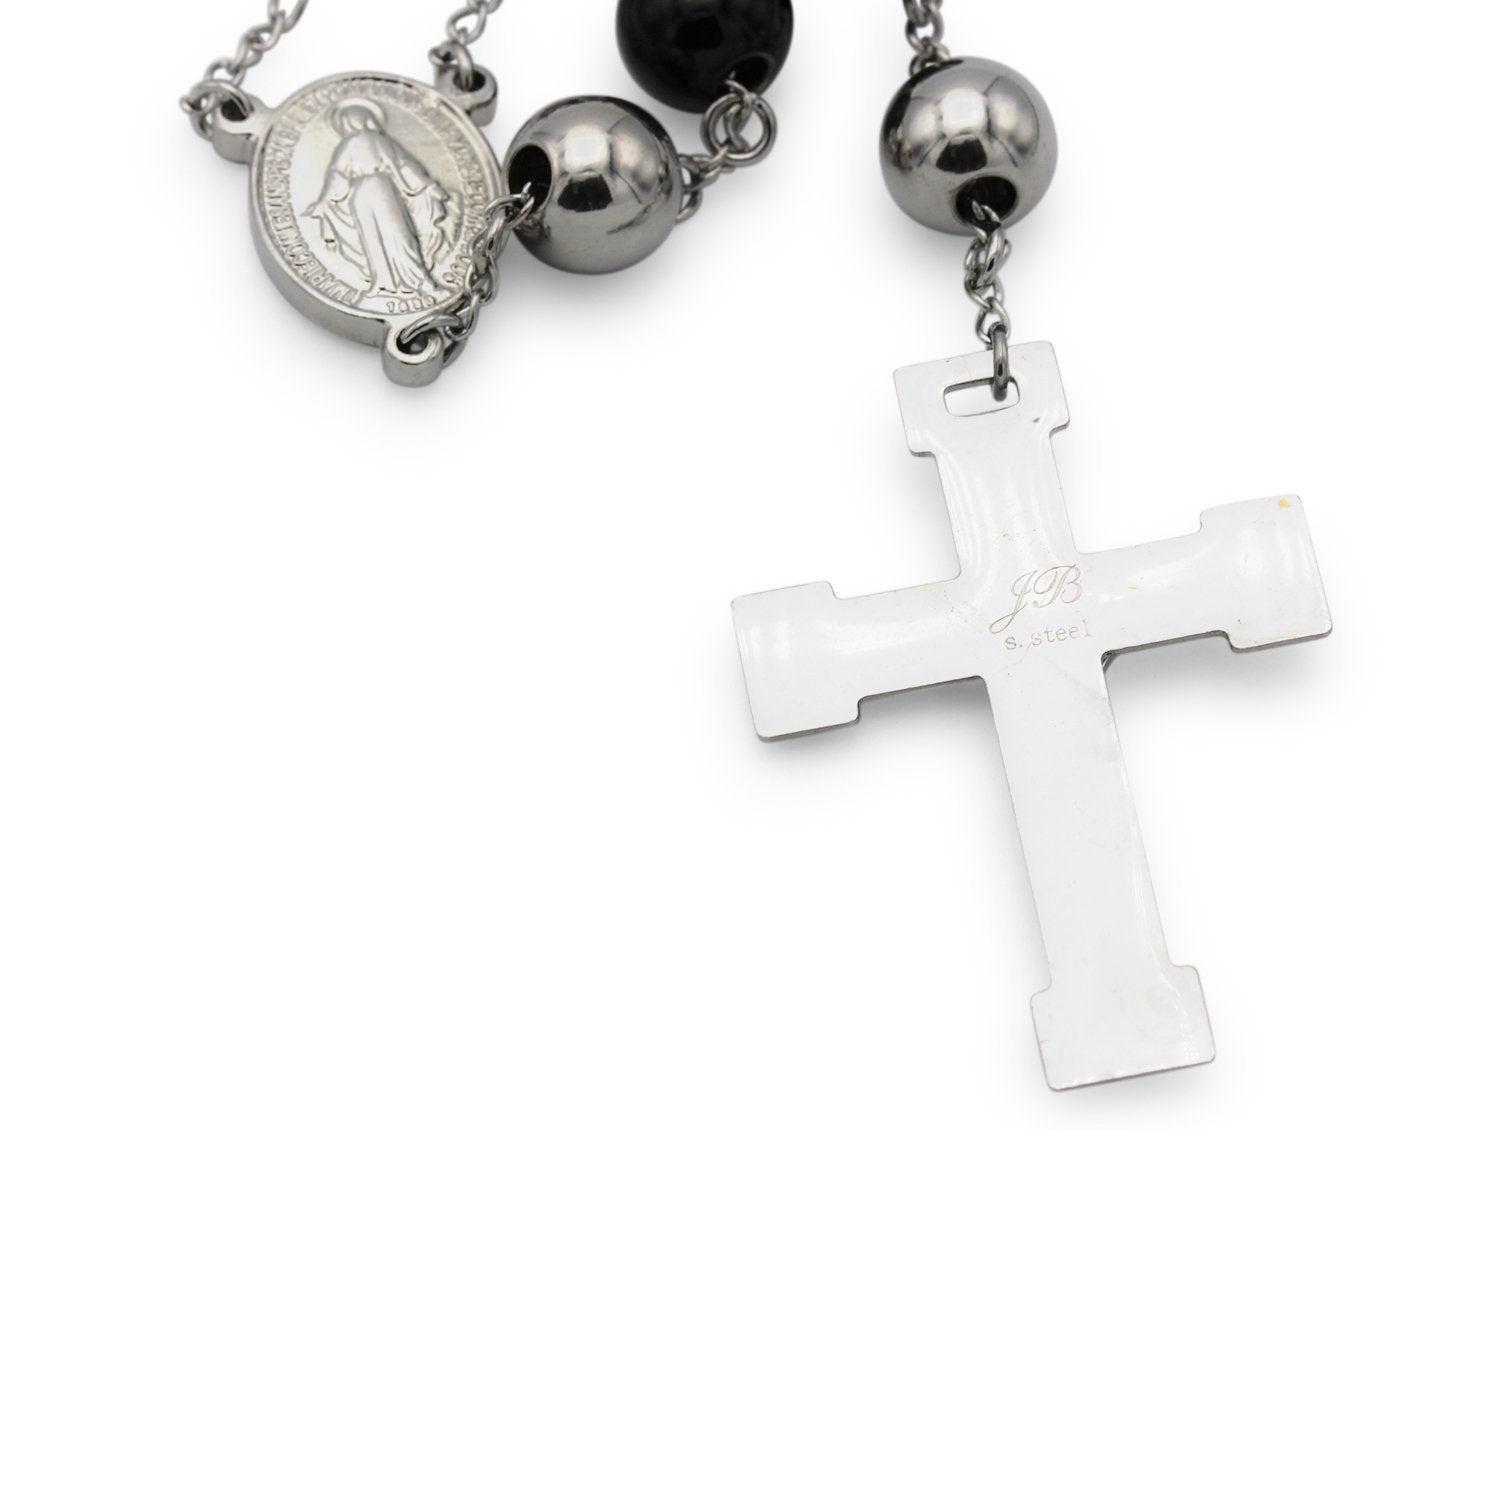 Traditional Rosary Necklace Five Decade Silver Black Catholic Prayer Beads 10 mm